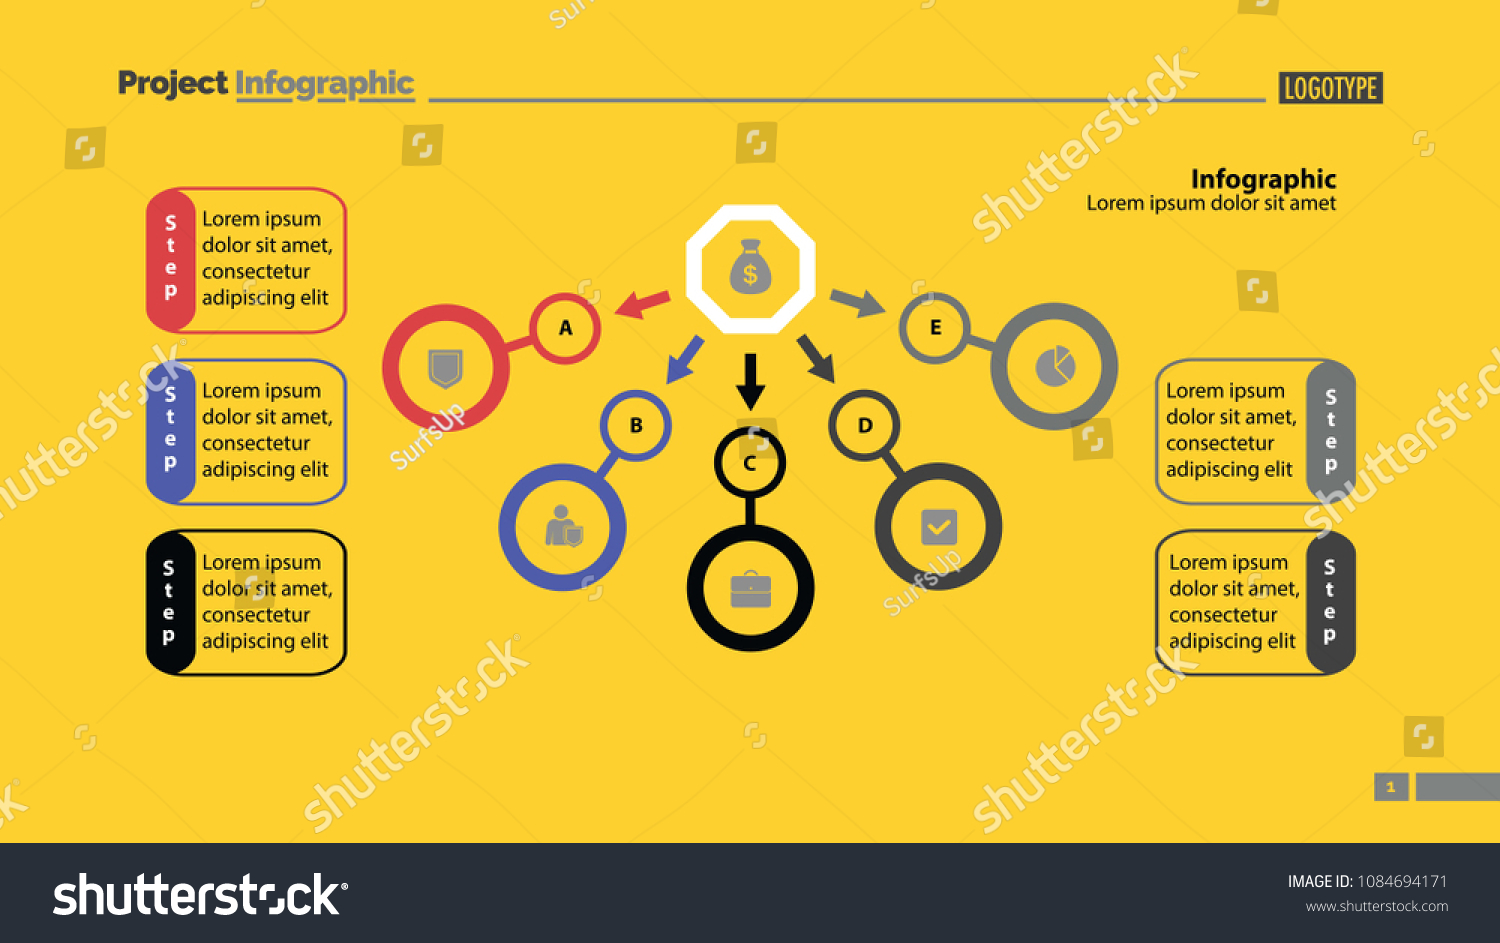 Five Step Process Chart Template Design Stock Vector Royalty Free 1084694171 Shutterstock 6307